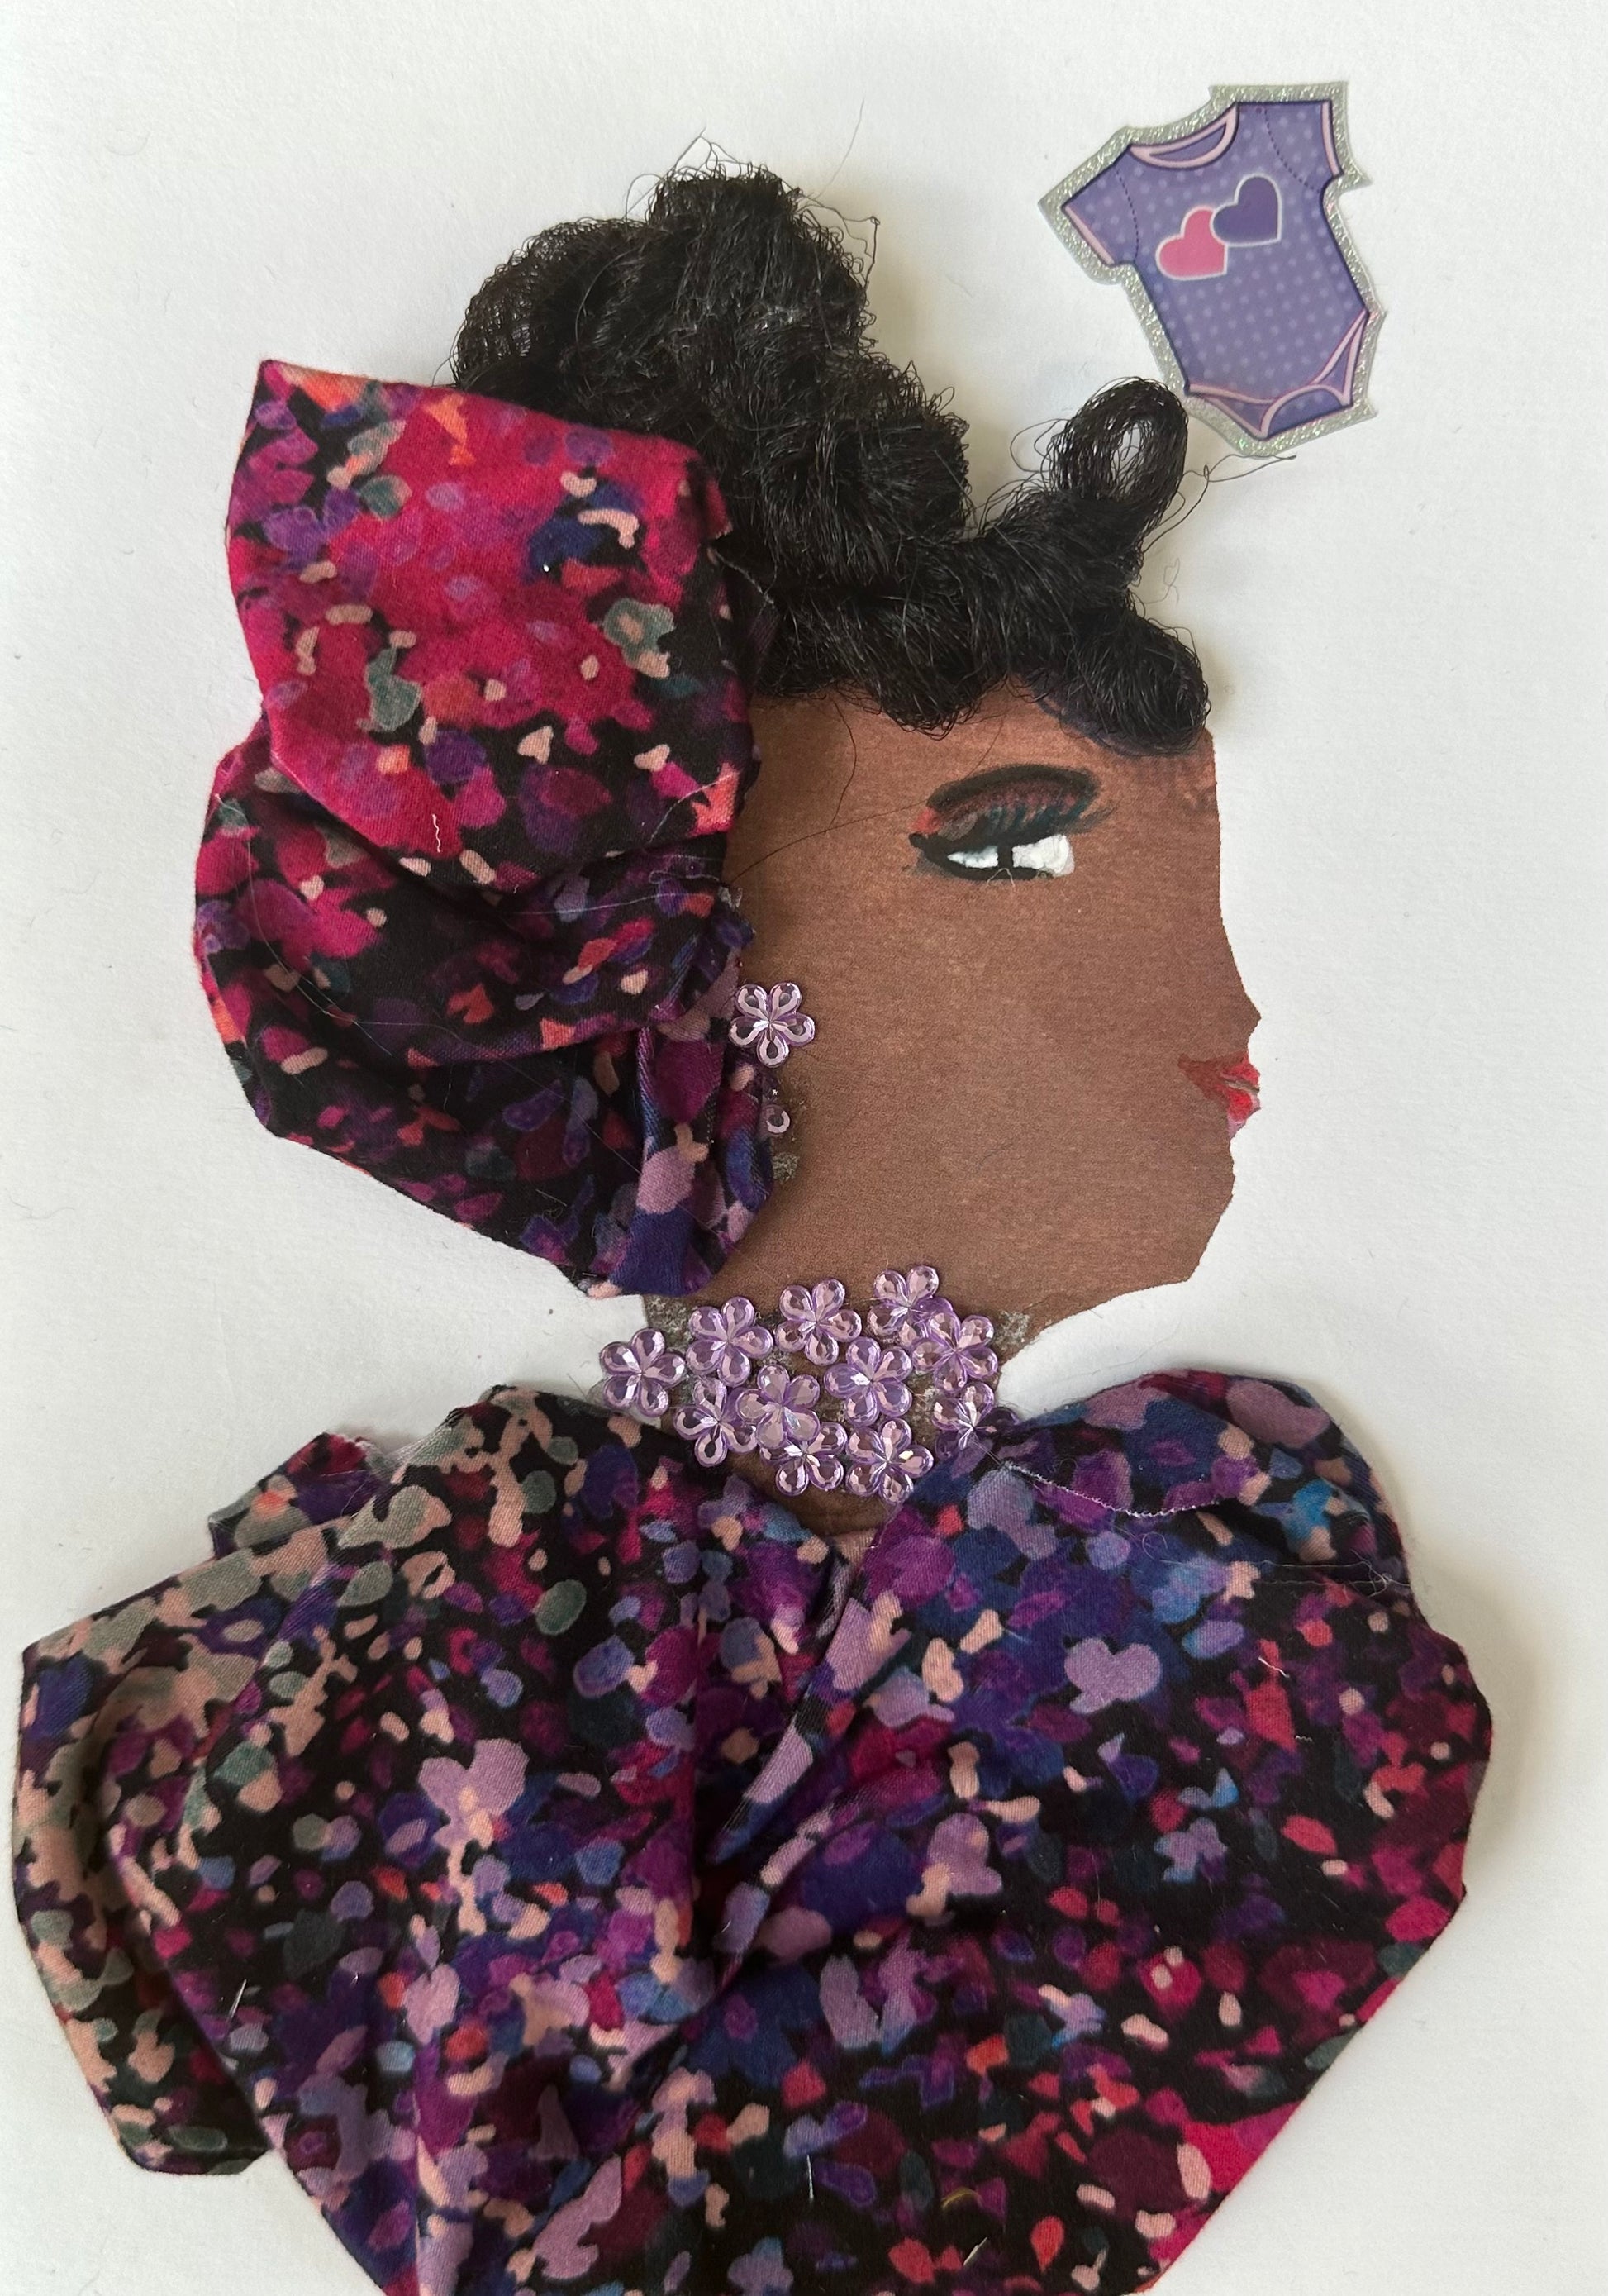 I designed this handmade card of Mayfair Mae who is dressed in a purple floral blouse with a matching hatinator. Her necklace and earrings are composed of light purple gemstones. Additionally, there is a light purple baby romper in the corner. 